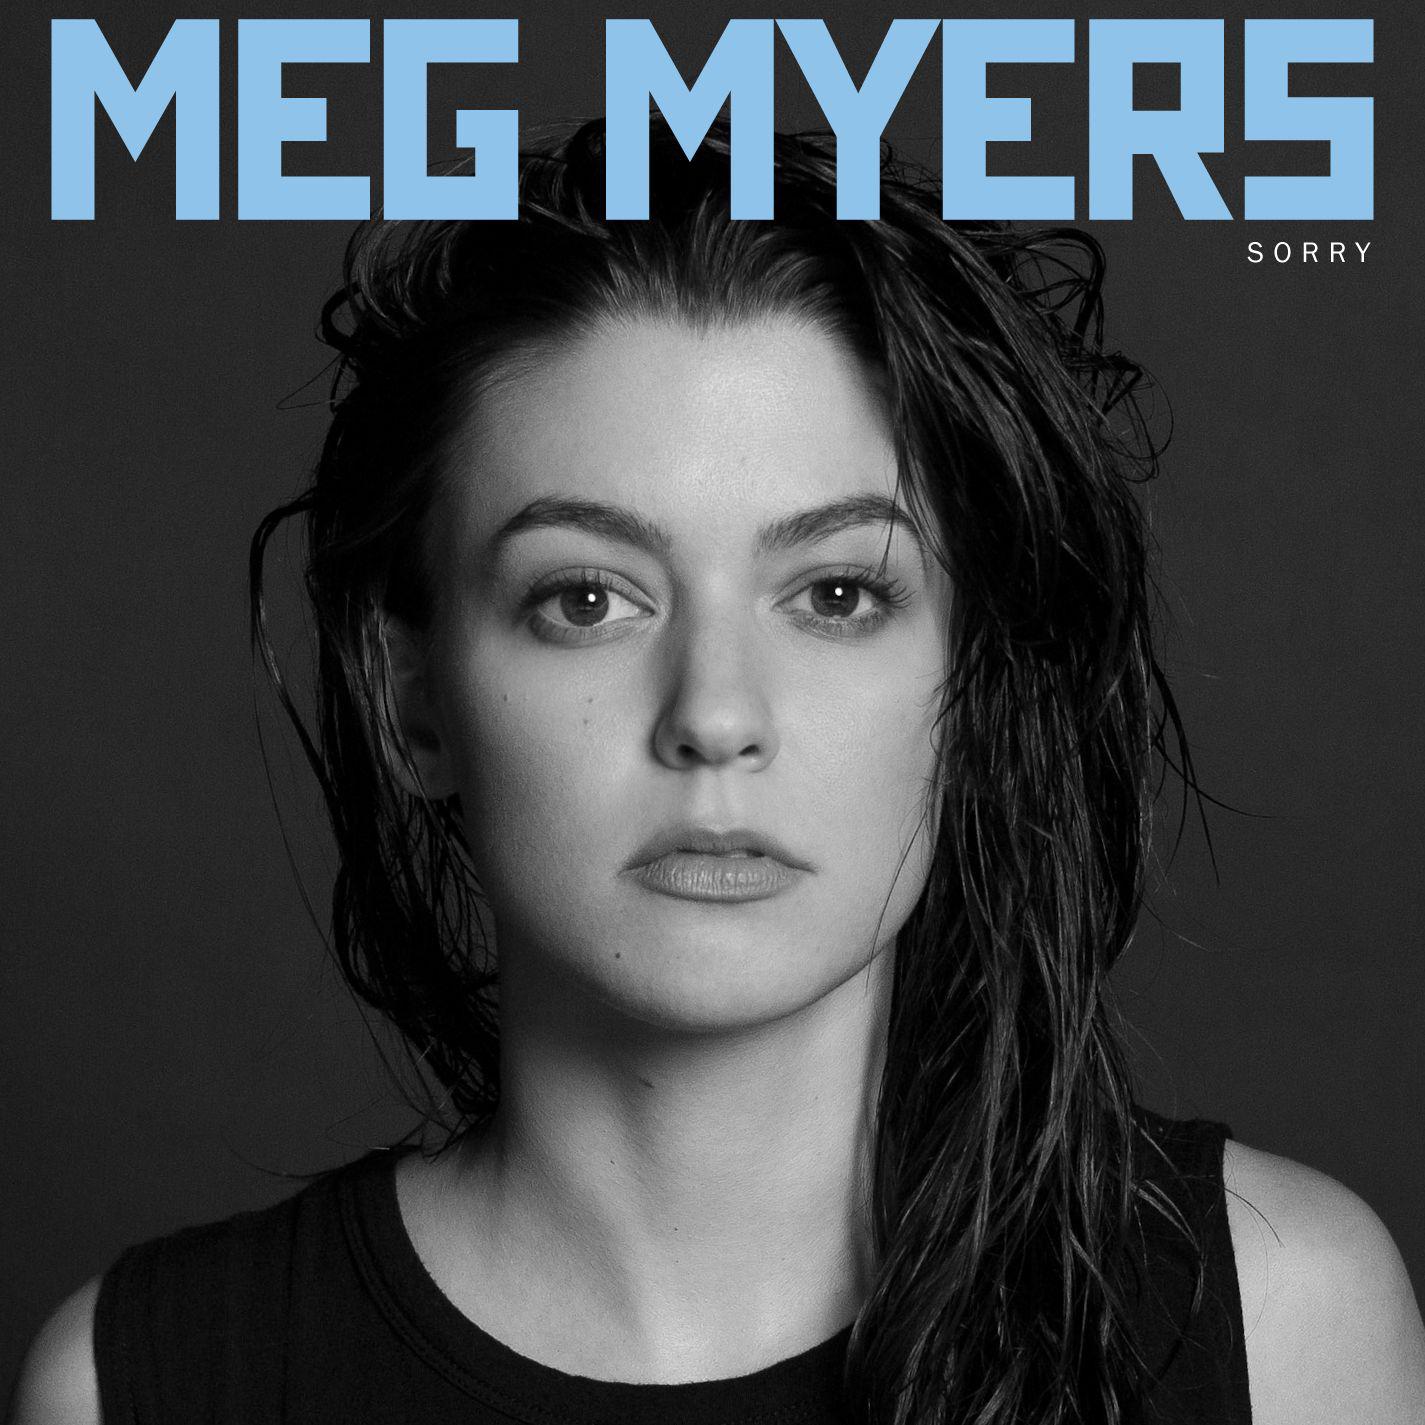 The Morning After歌词 歌手Meg Myers-专辑Sorry-单曲《The Morning After》LRC歌词下载